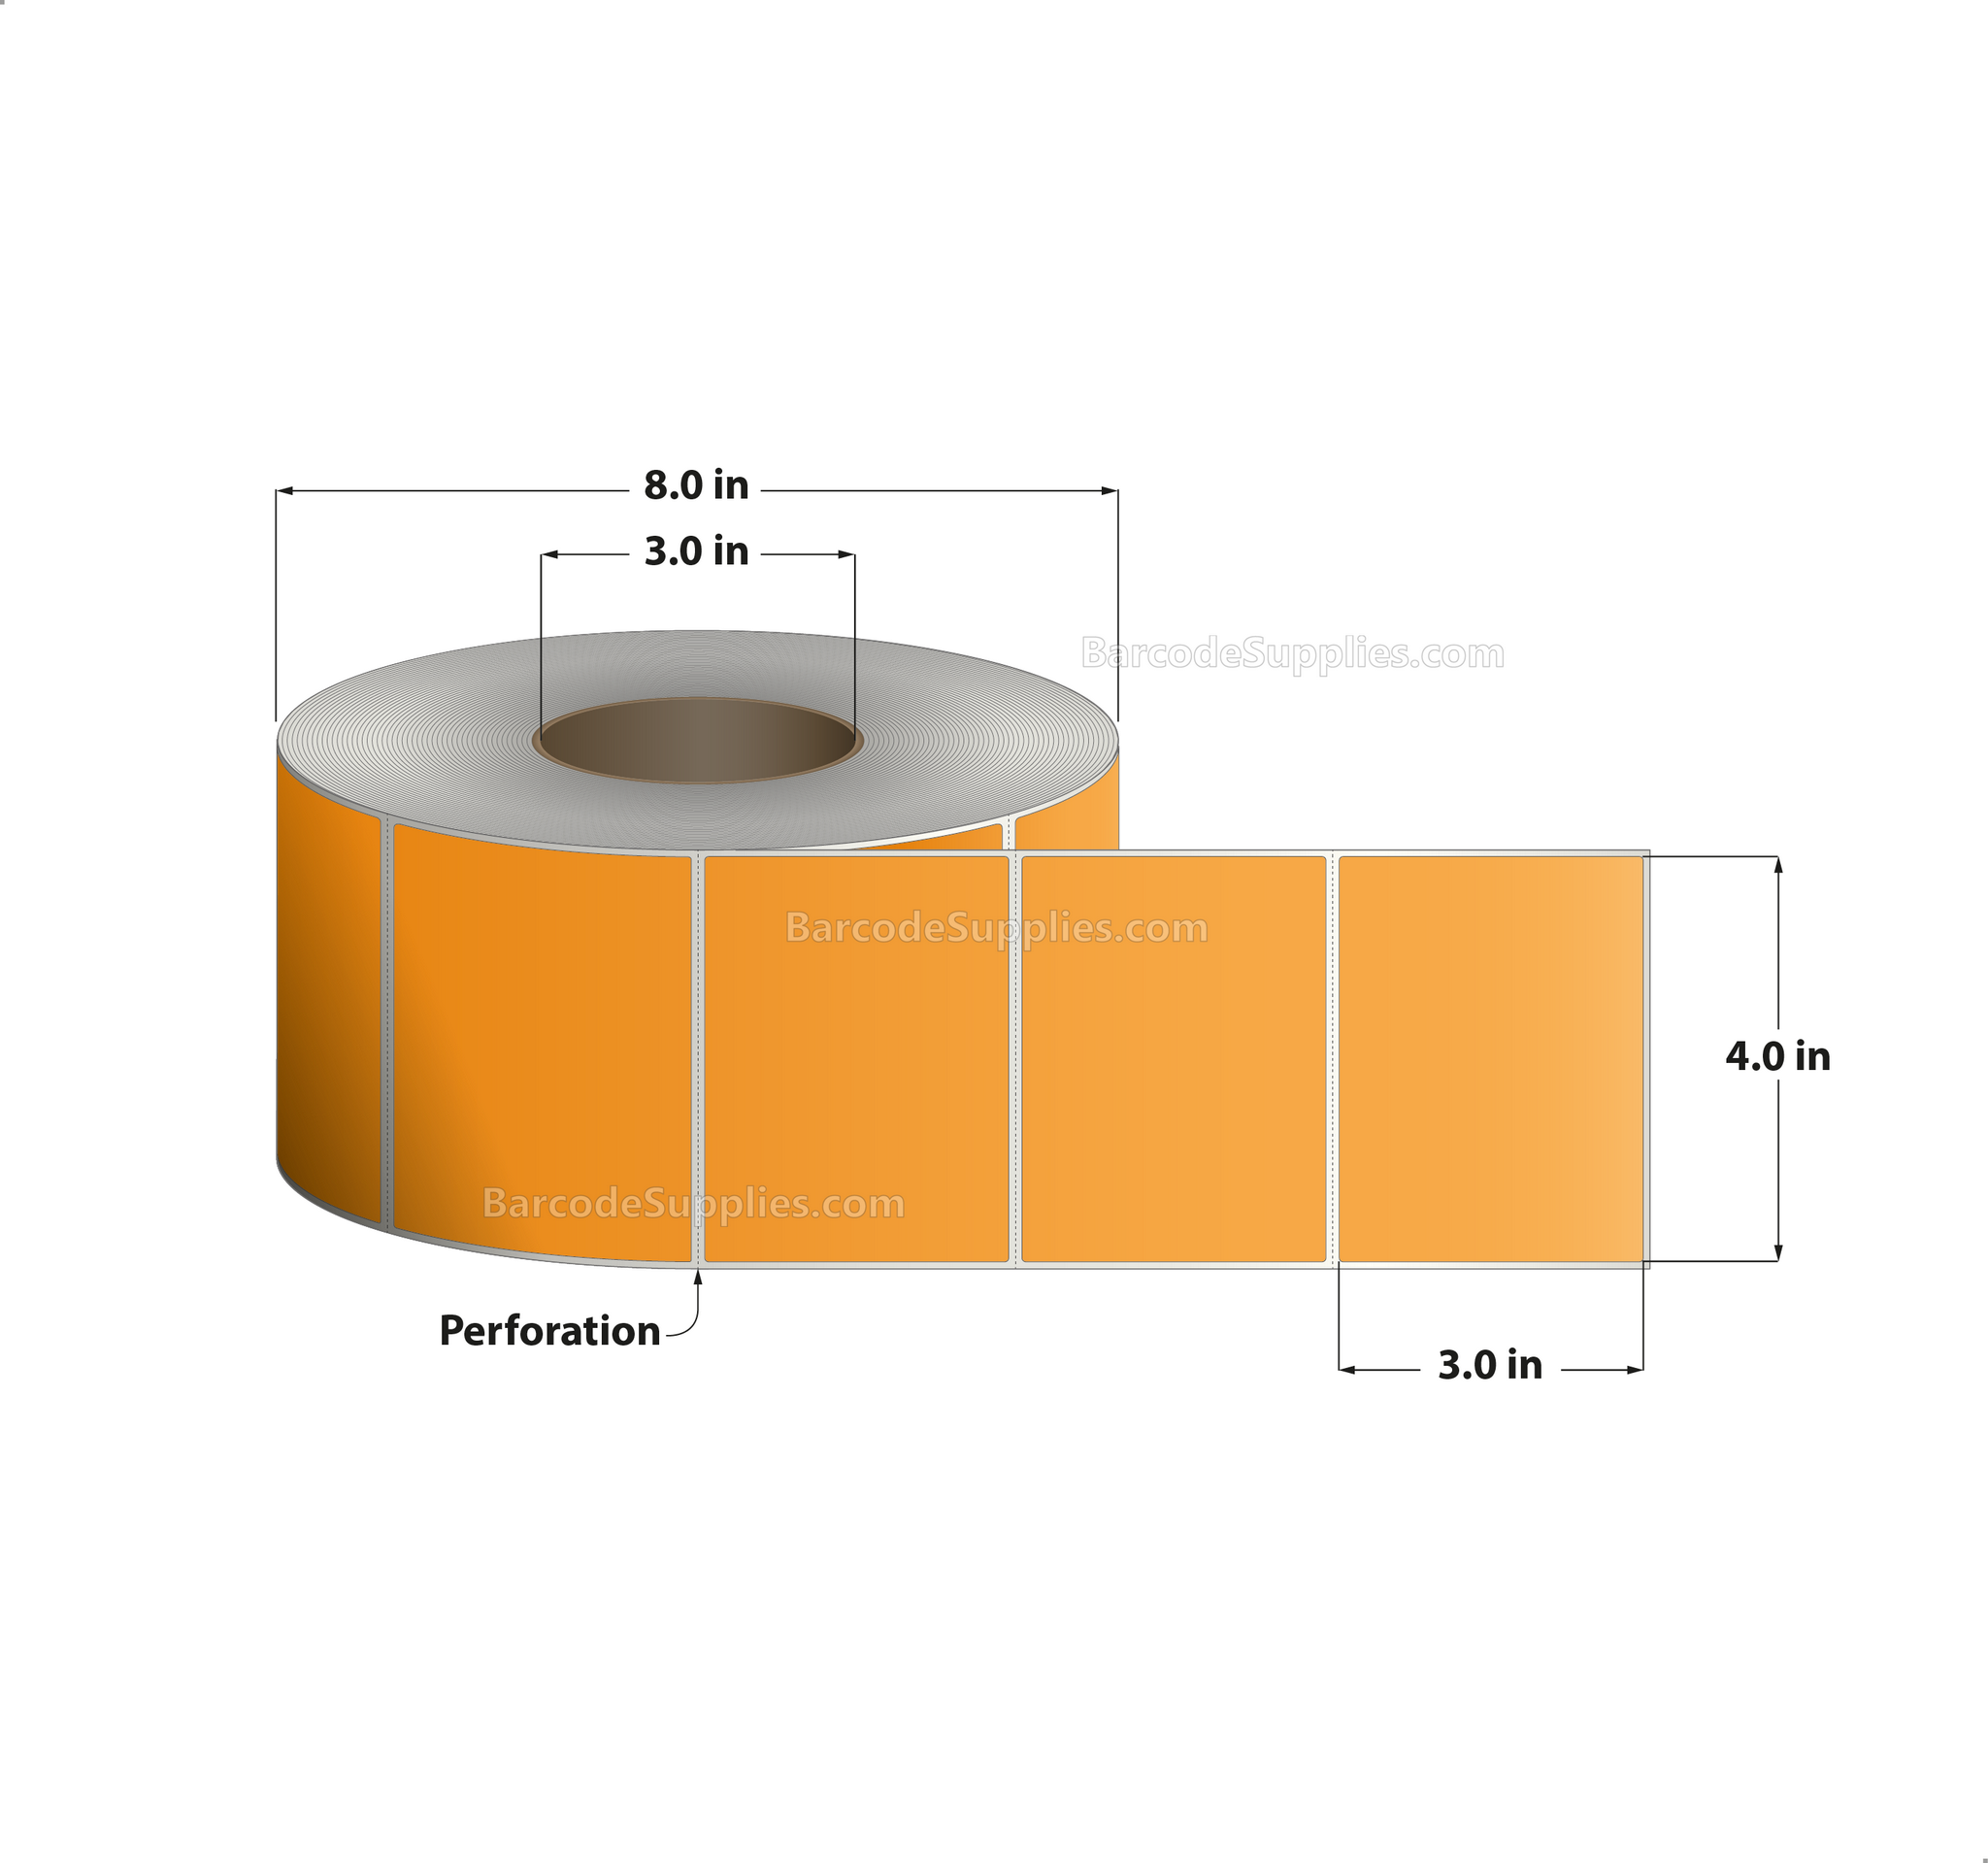 4 x 3 Thermal Transfer 1495 Orange Labels With Permanent Adhesive - Perforated - 1900 Labels Per Roll - Carton Of 4 Rolls - 7600 Labels Total - MPN: RFC-4-3-1900-OR